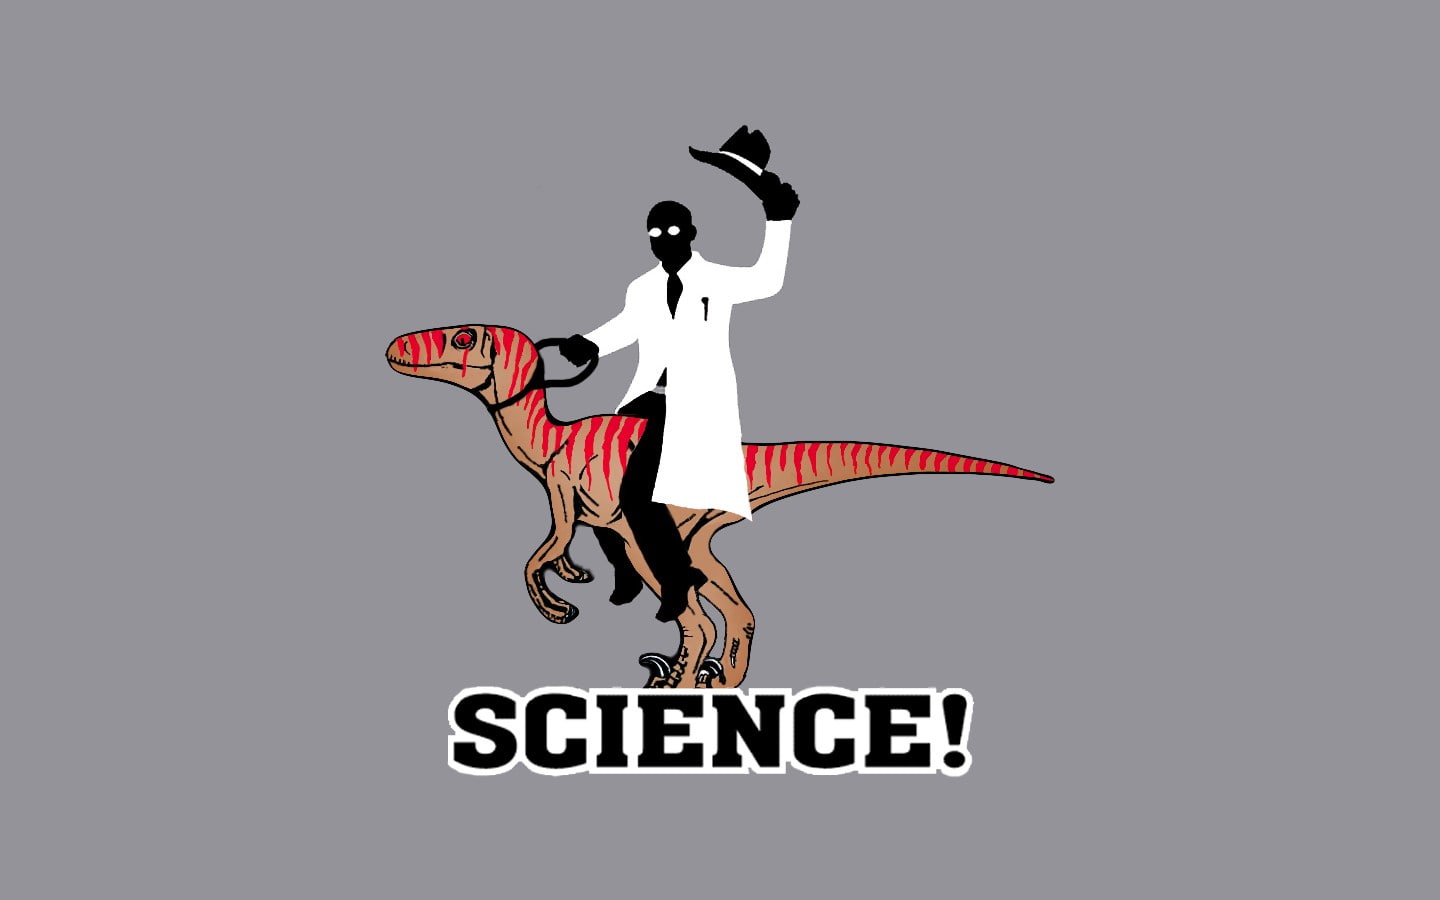 quote, humor, minimalism, science, dinosaurs, text, communication